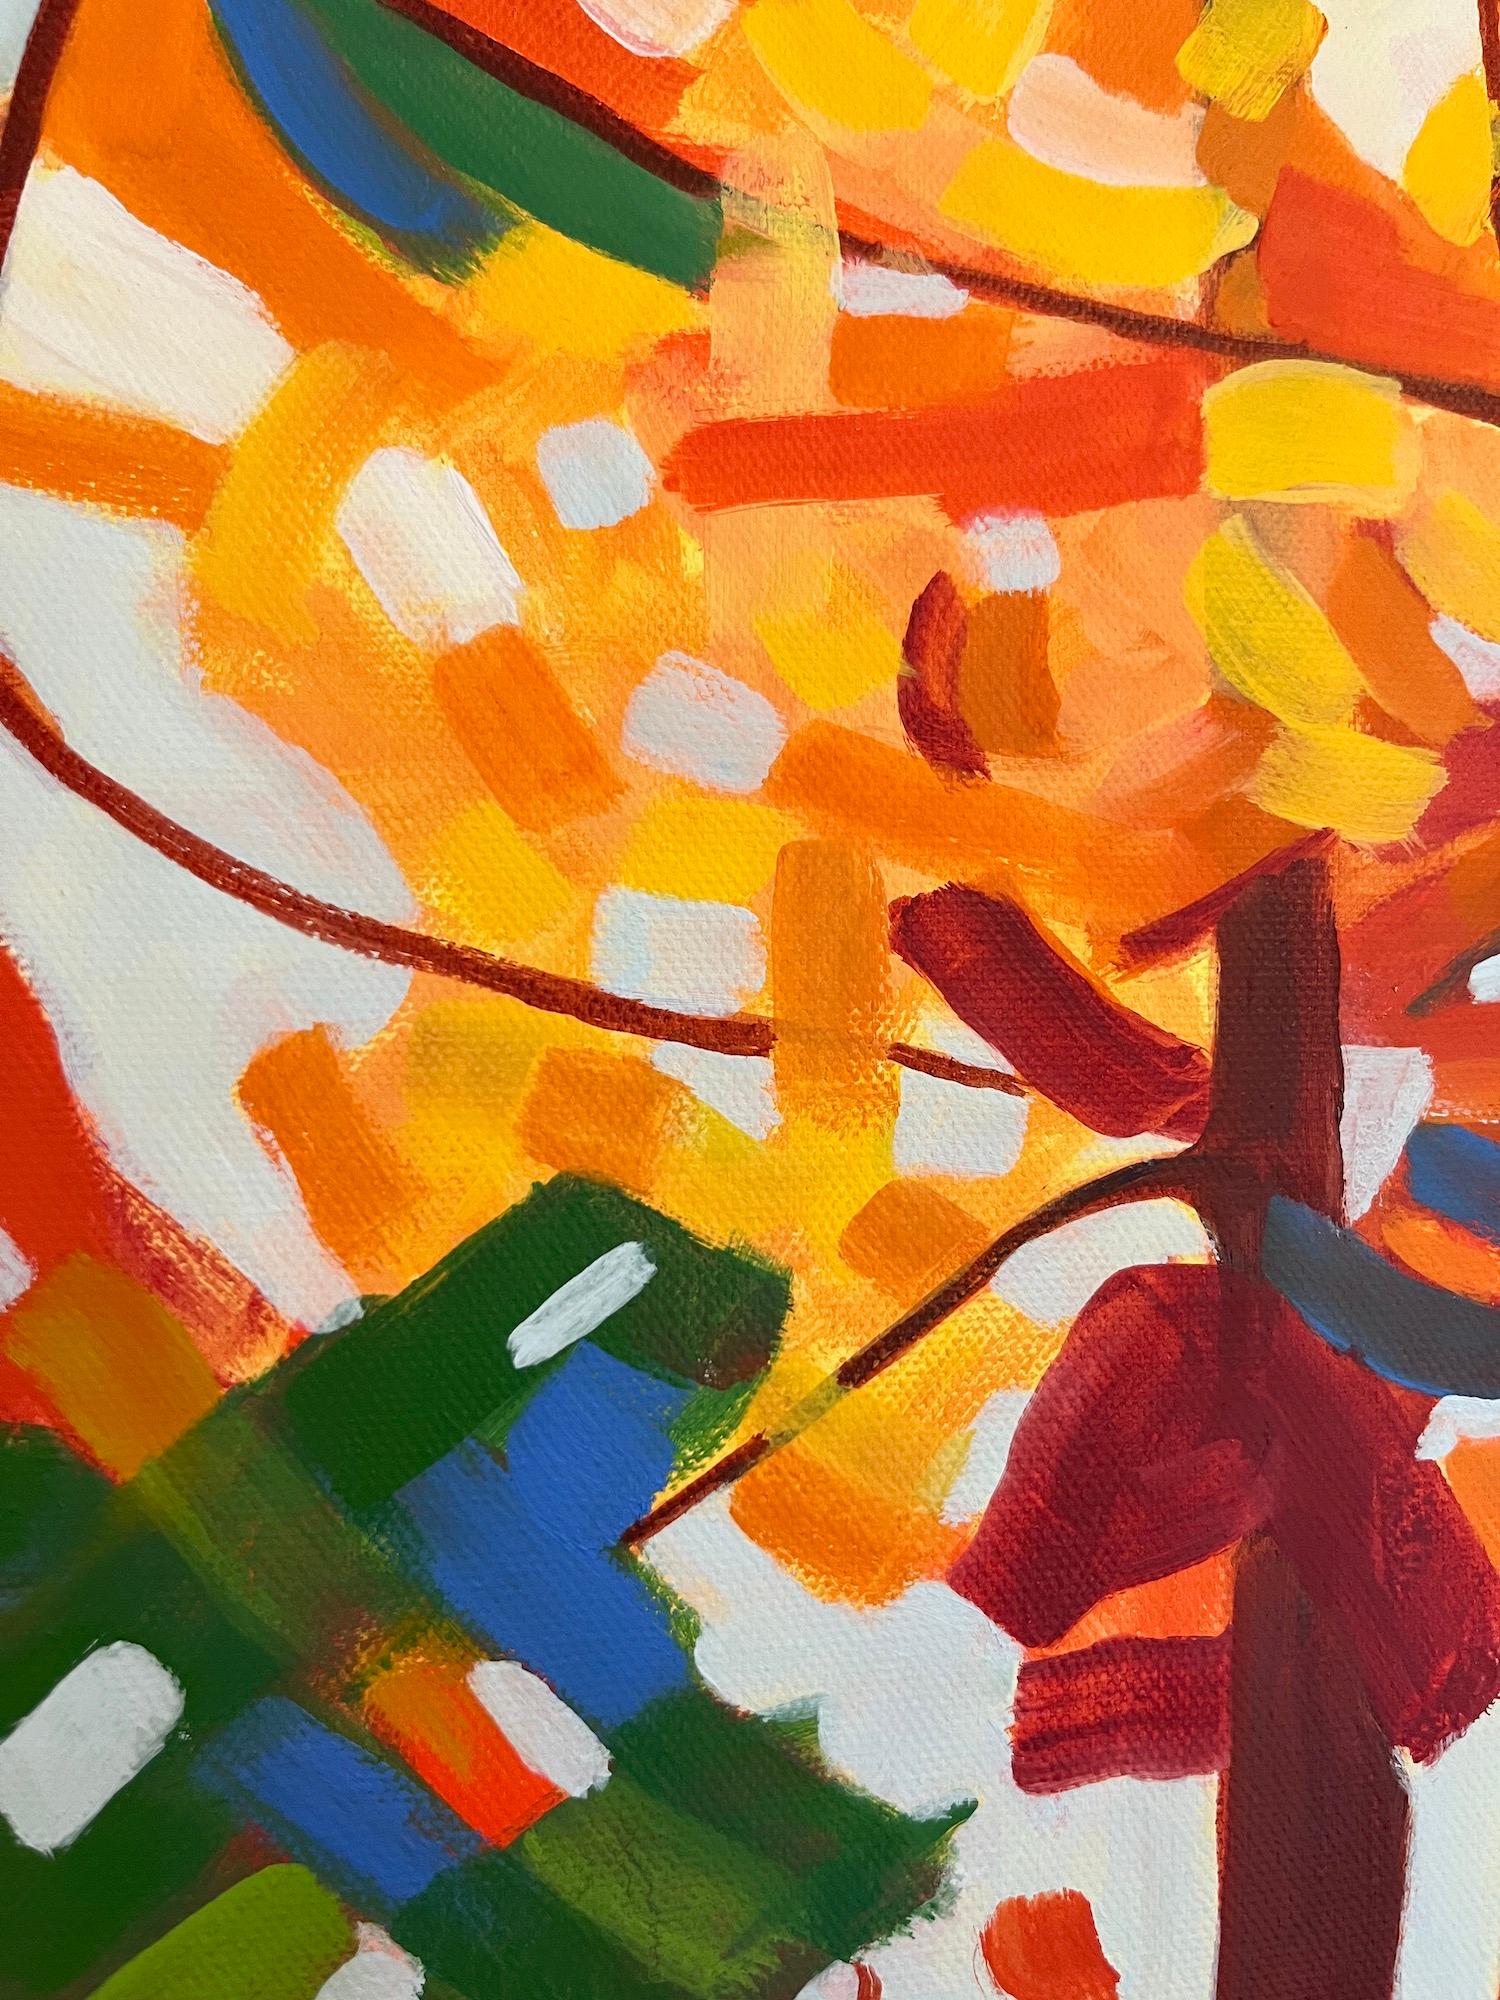 “Preludio” by Marcia Wise is a 36 x 48 x 1.5 inch oil painting which is part of her “Tree” series exploring the colors of Autumn where earthy reds are balanced with greens amid oranges and yellows all dancing in a light breeze of blues which call us